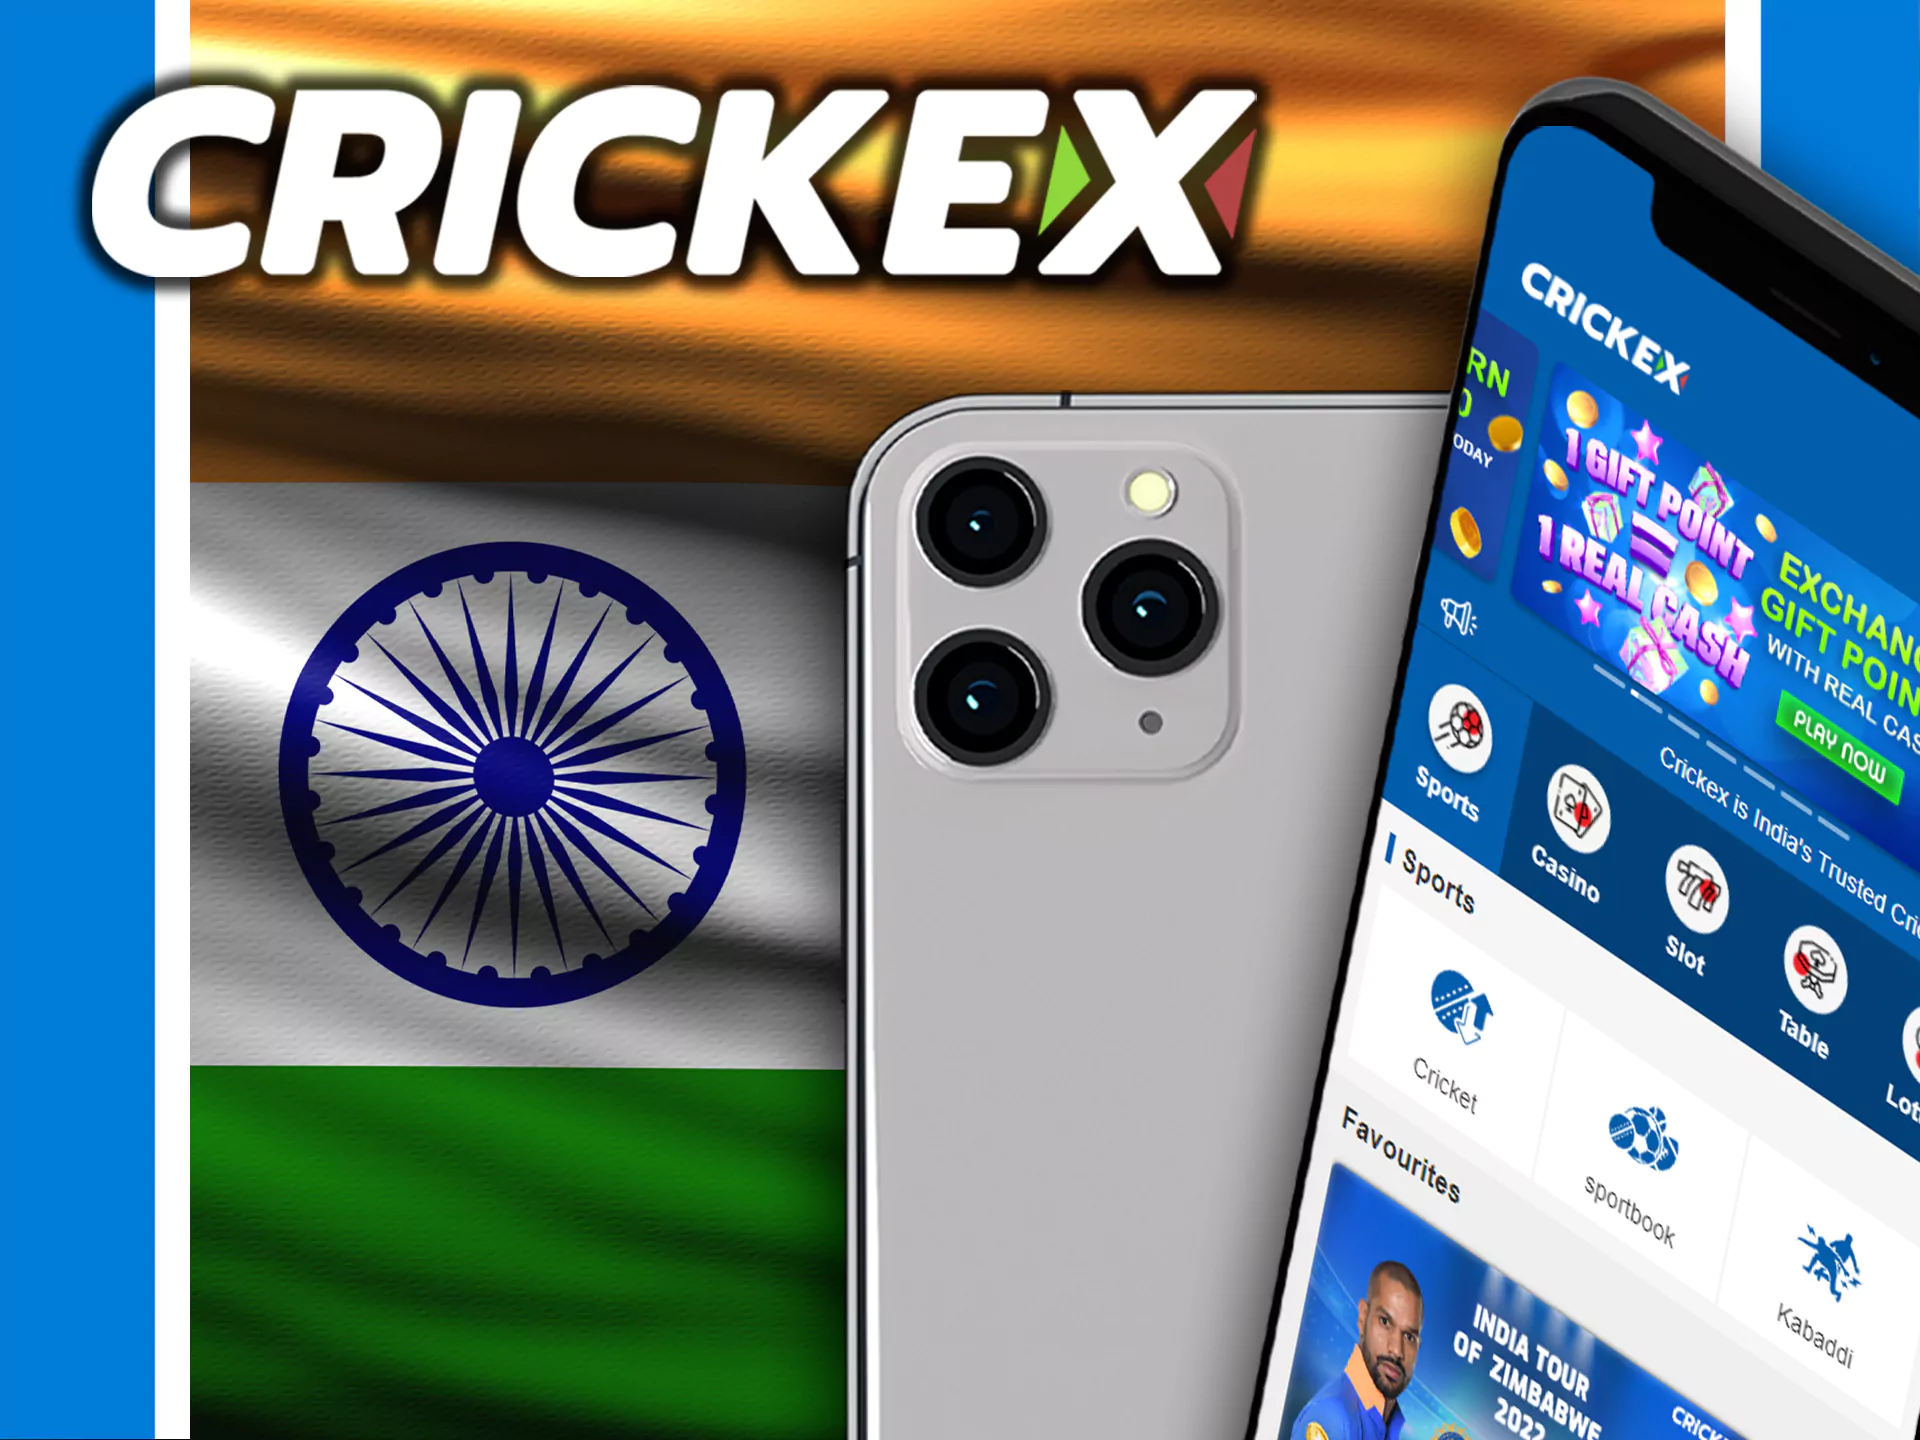 The Crickex app is great for betting on sports in India.